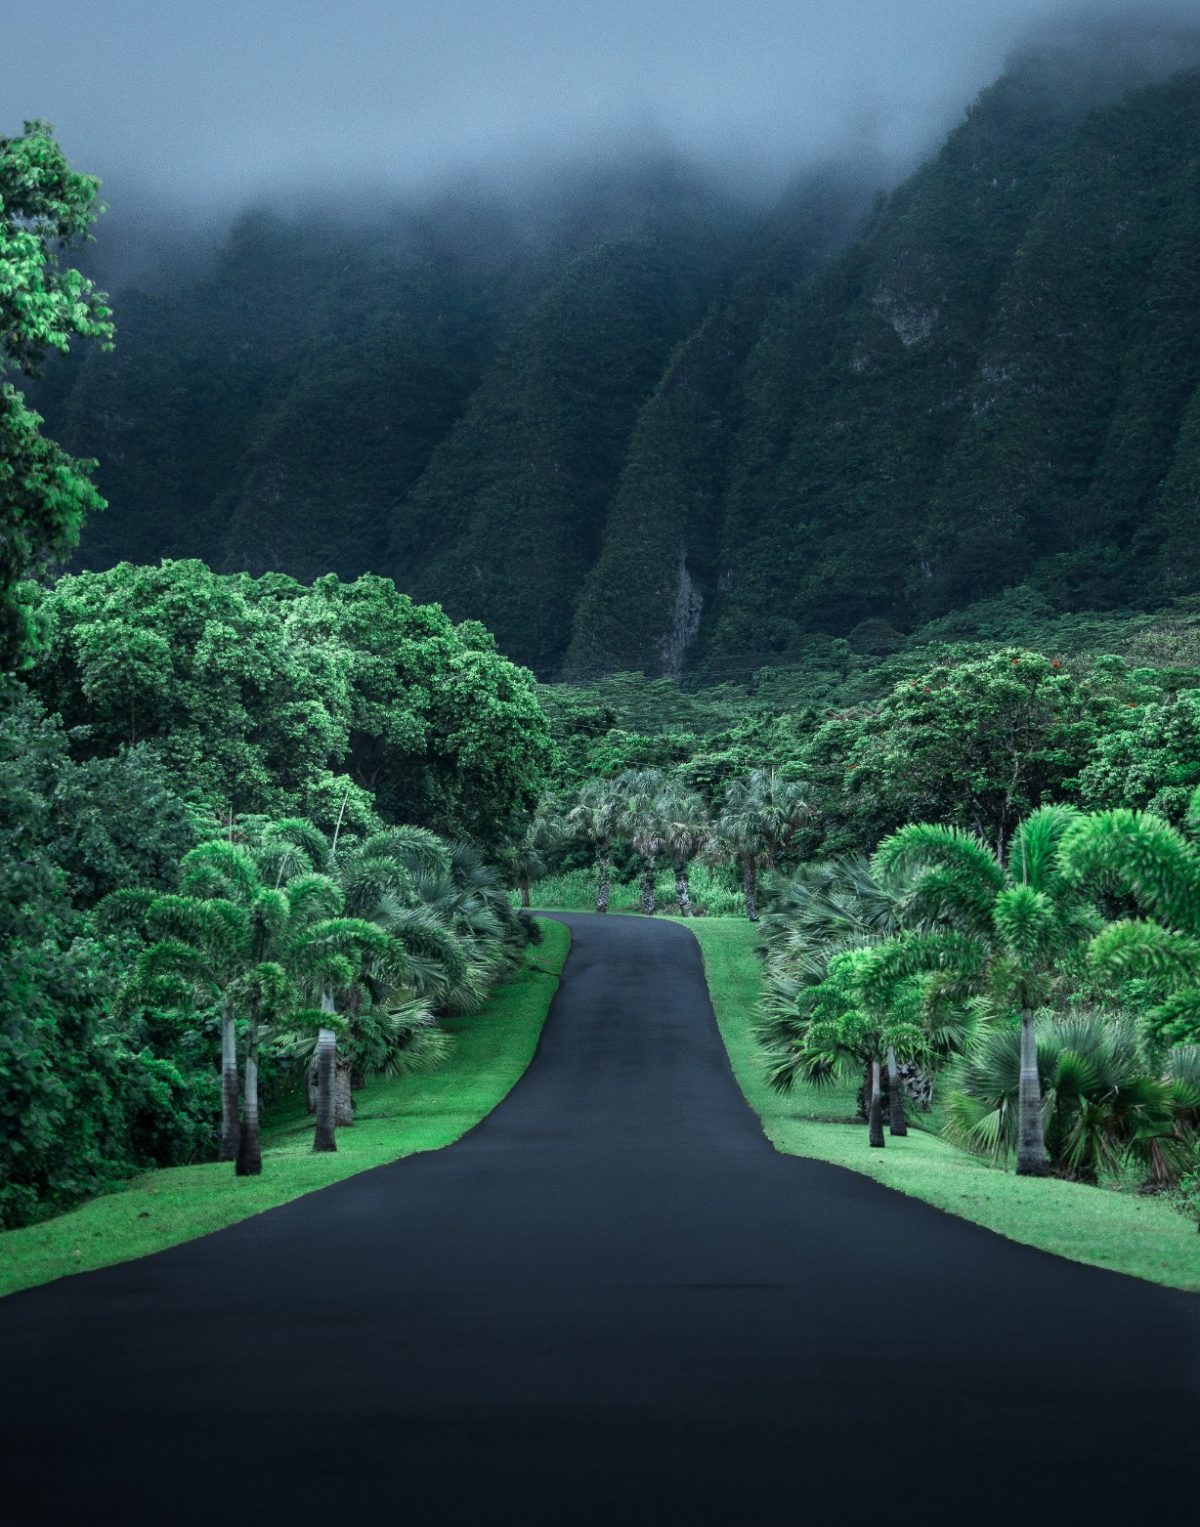 The asphalt road through lush bright green trees and vegetation stretches into the distance with steep mountains and dark clouds towering in the sky.